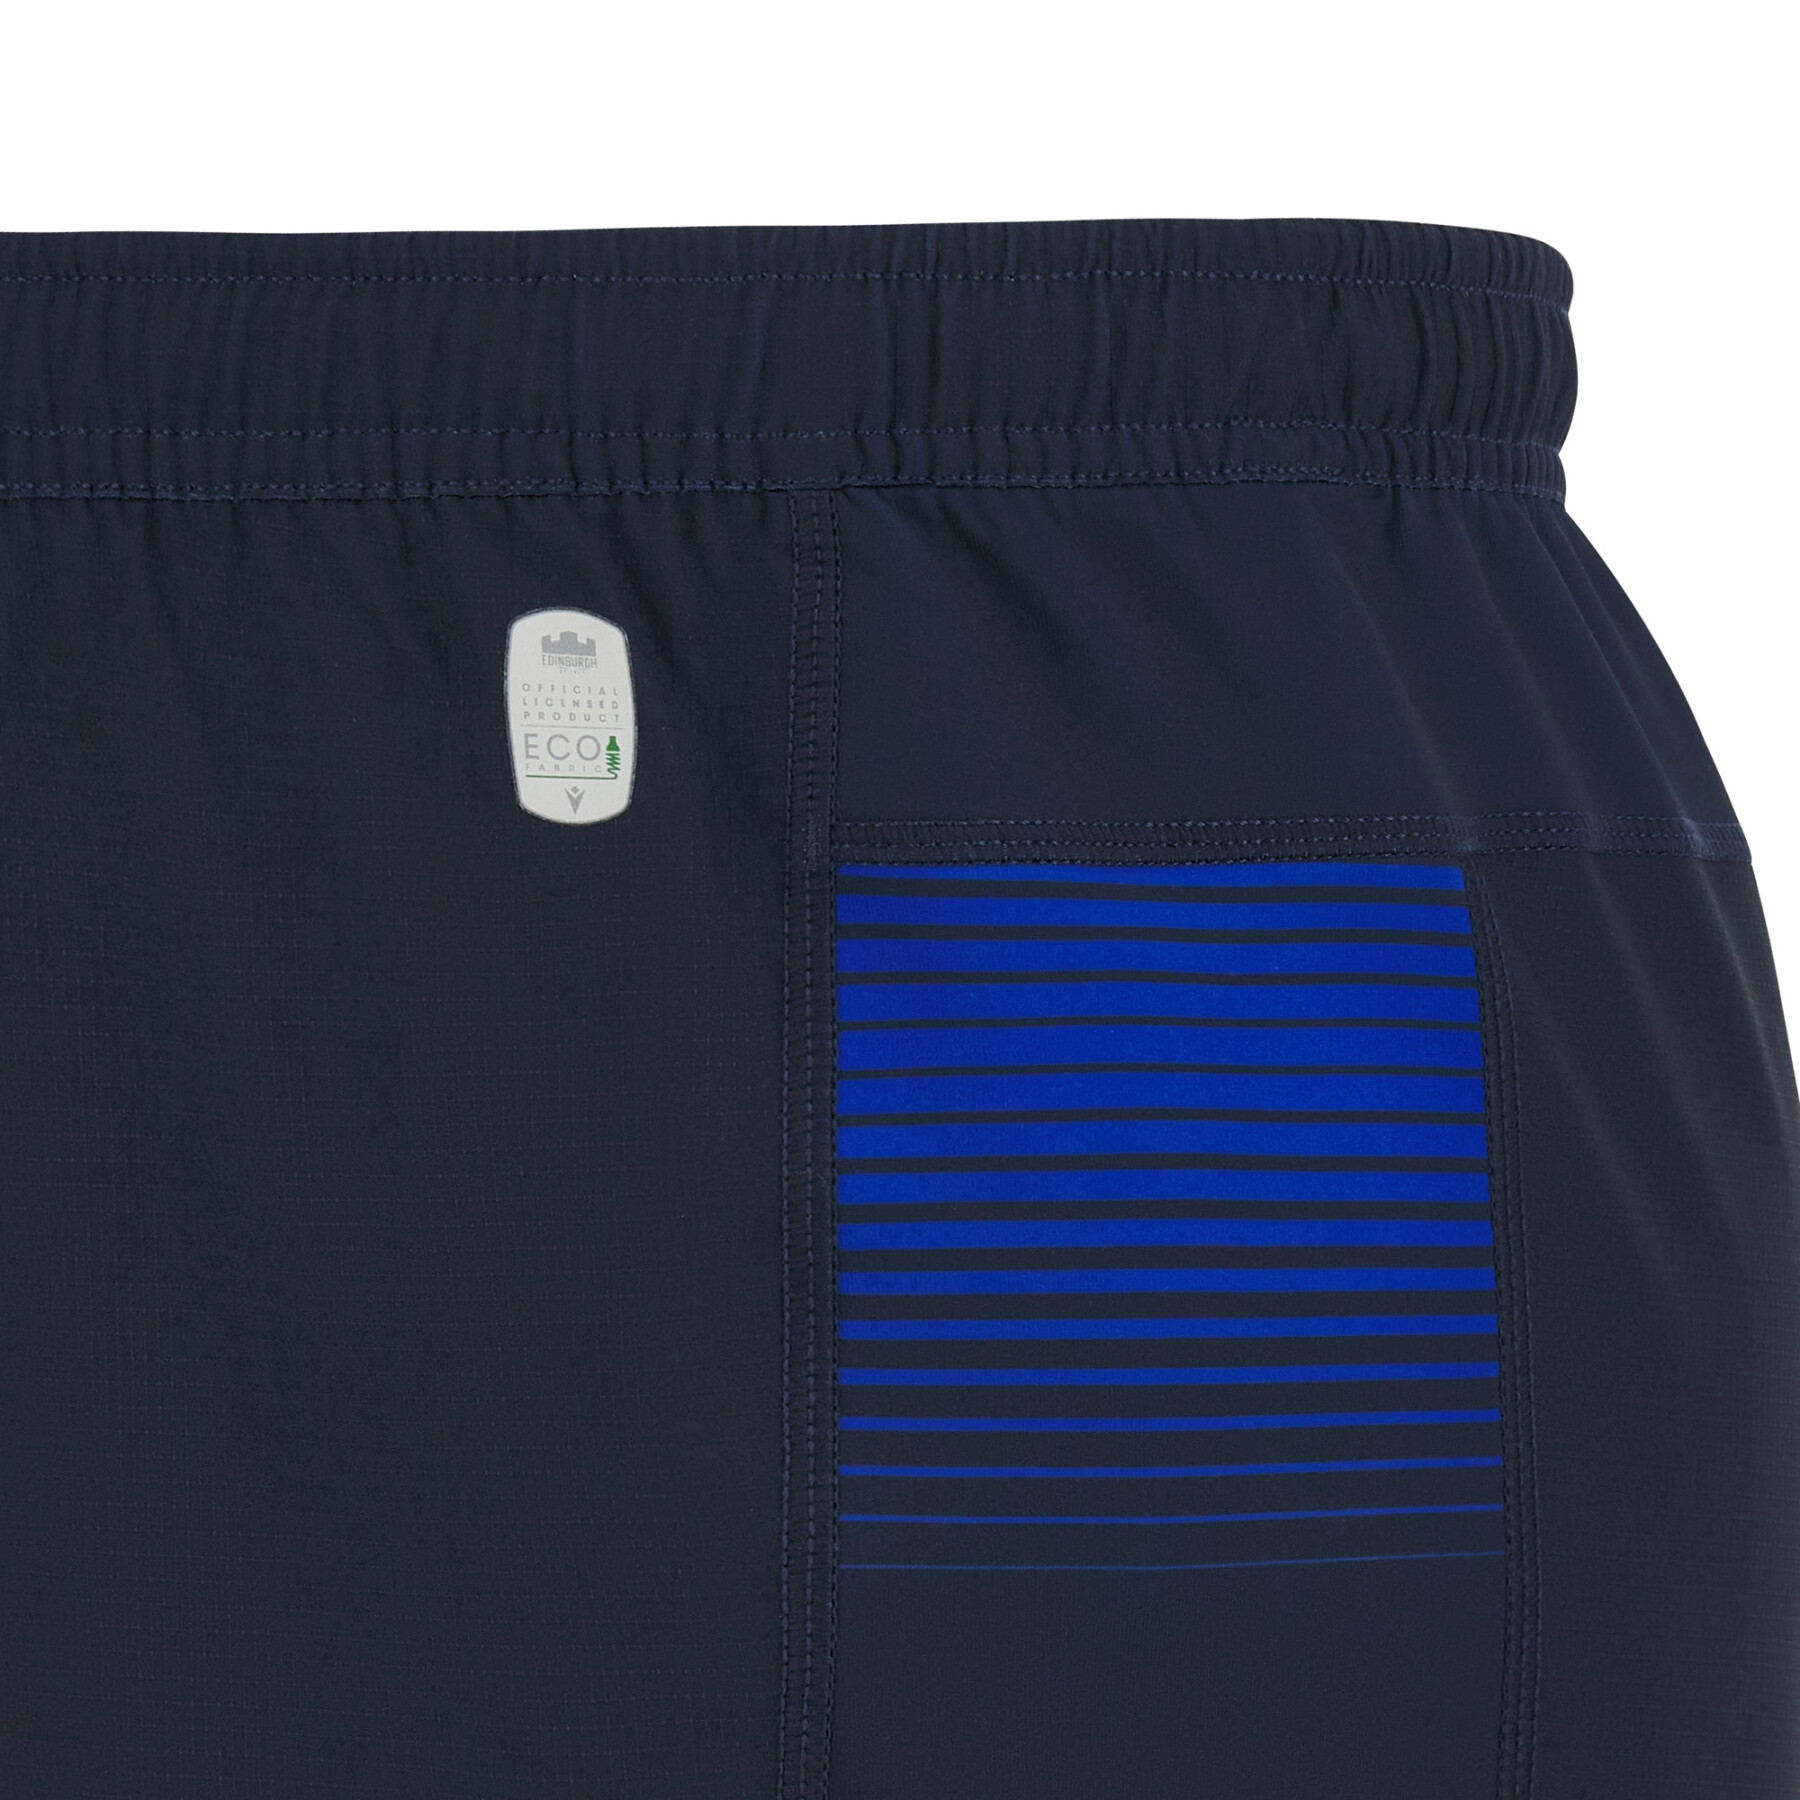 Authentic home shorts Édimbourg Rugby